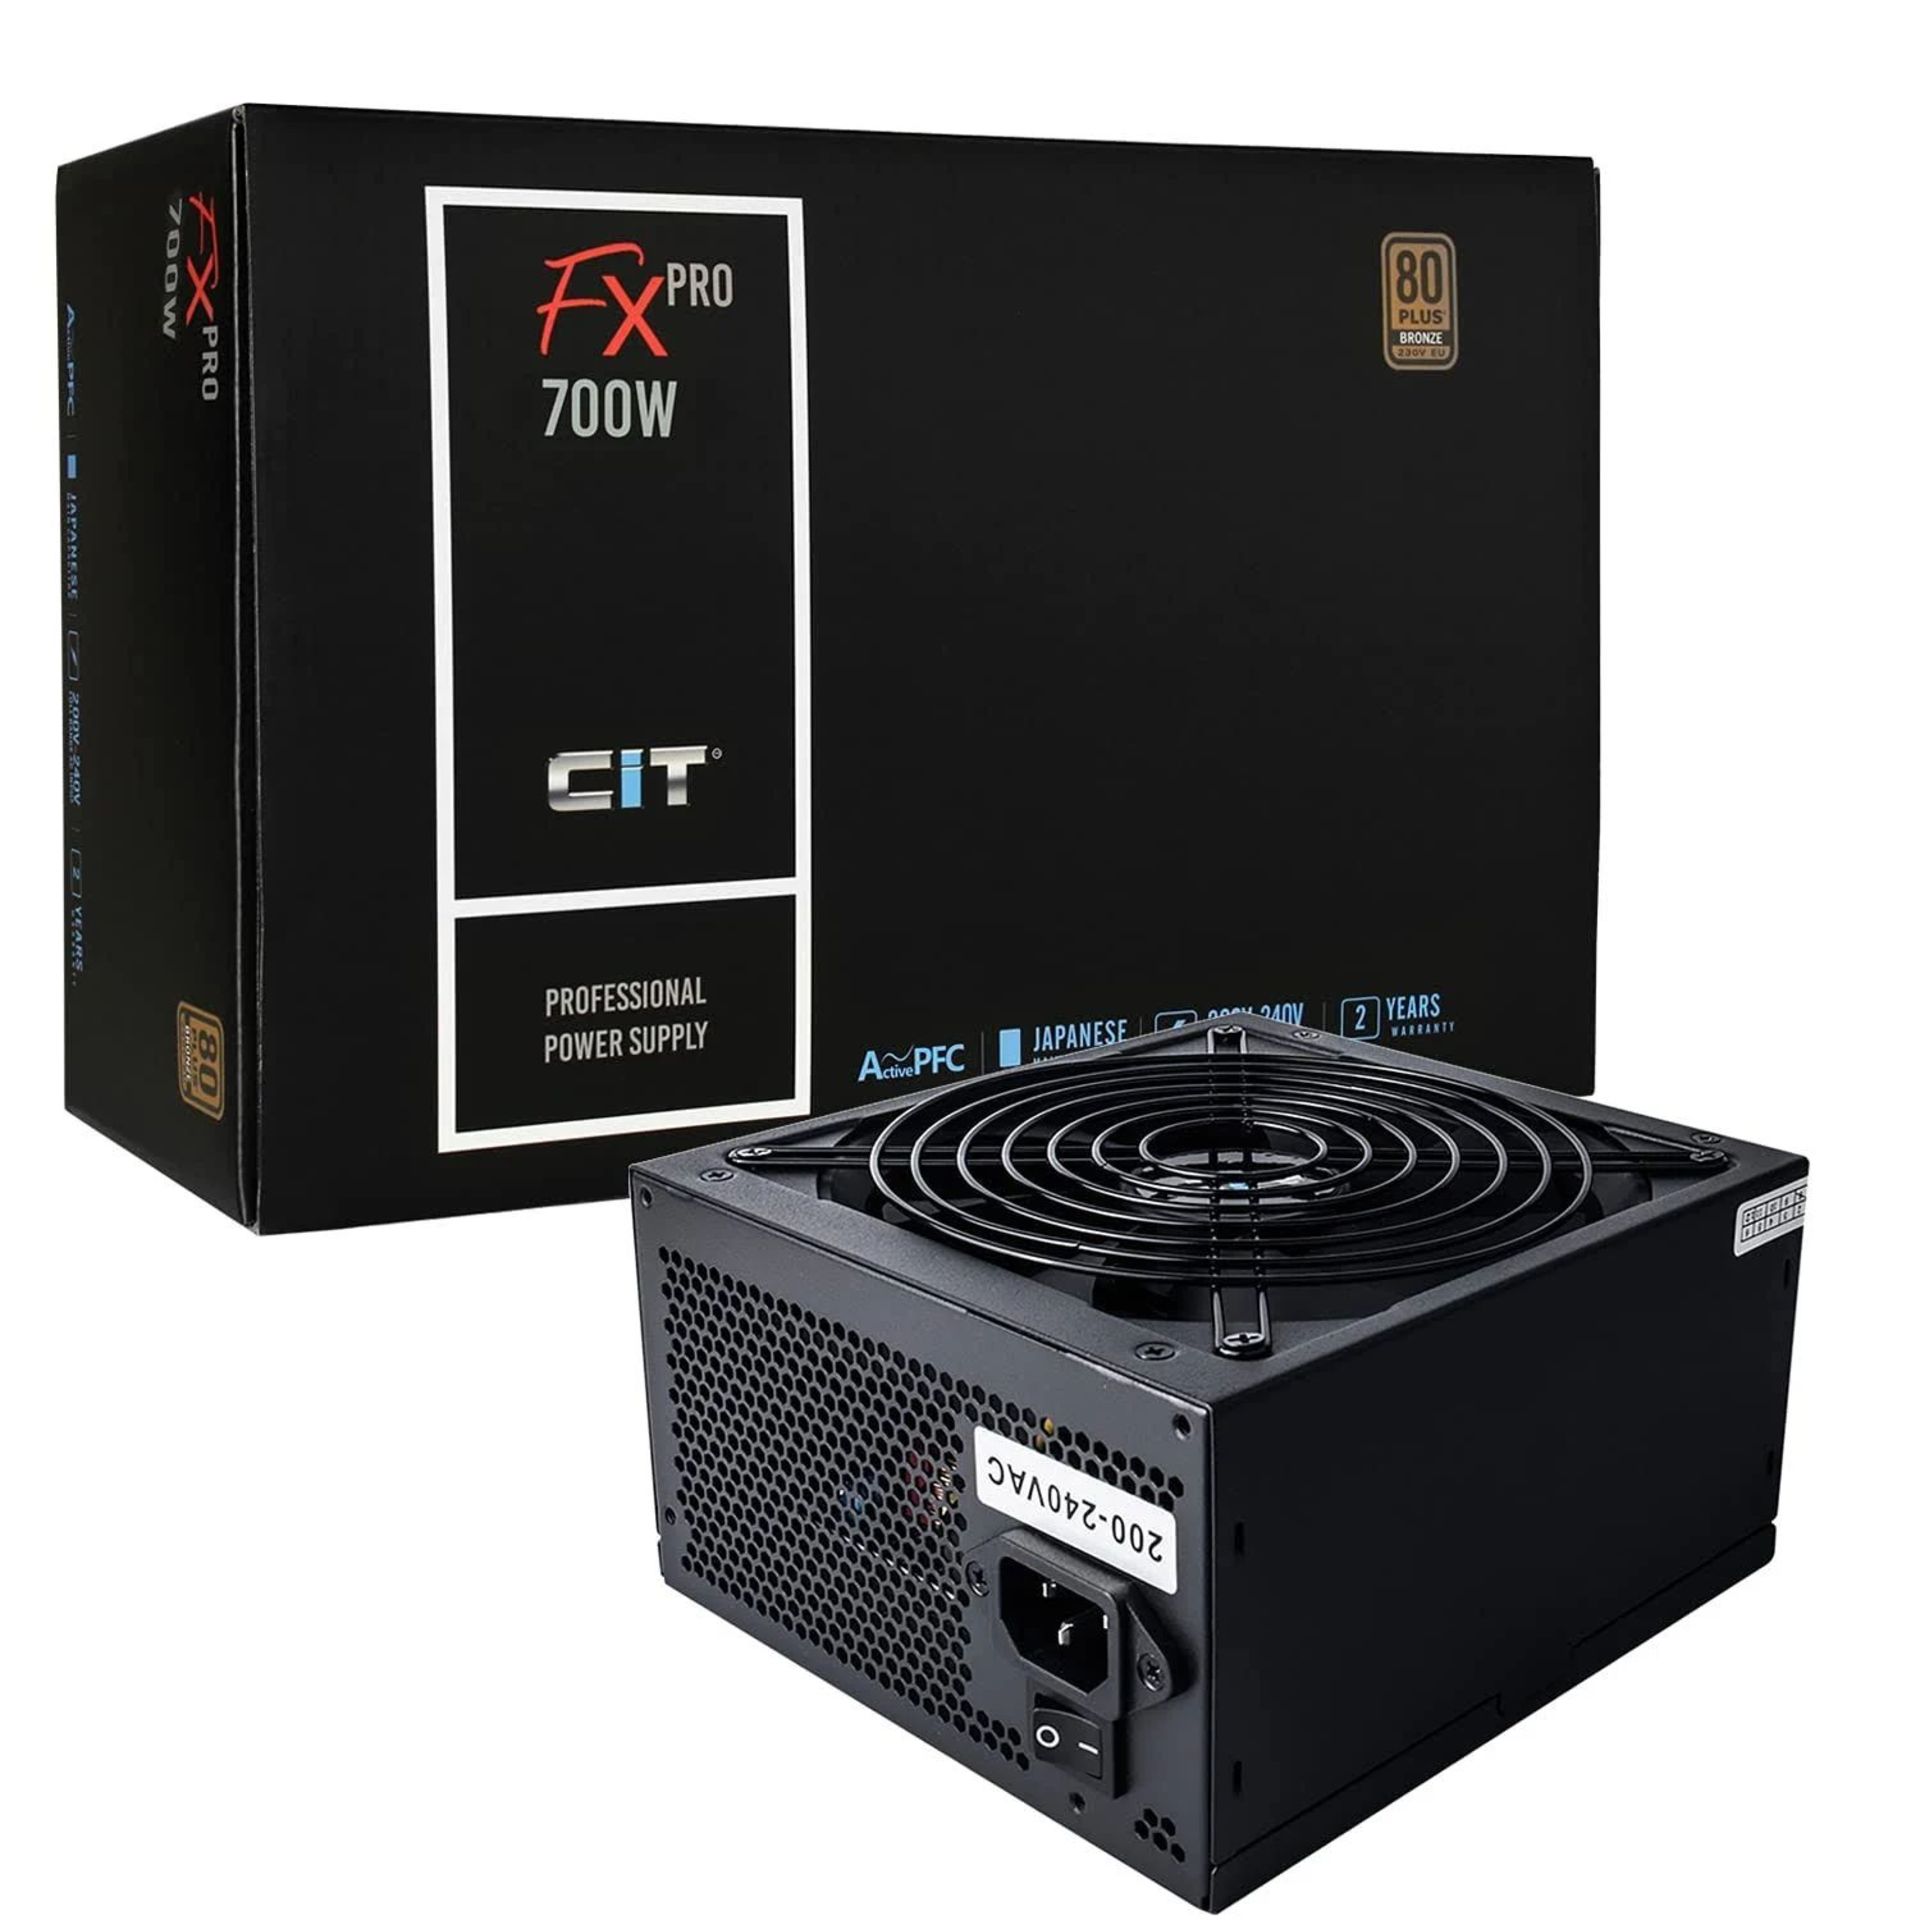 CiT FX Pro 700W Power Supply 80 Plus Bronze. - P4. Not only is this power supply impressive in